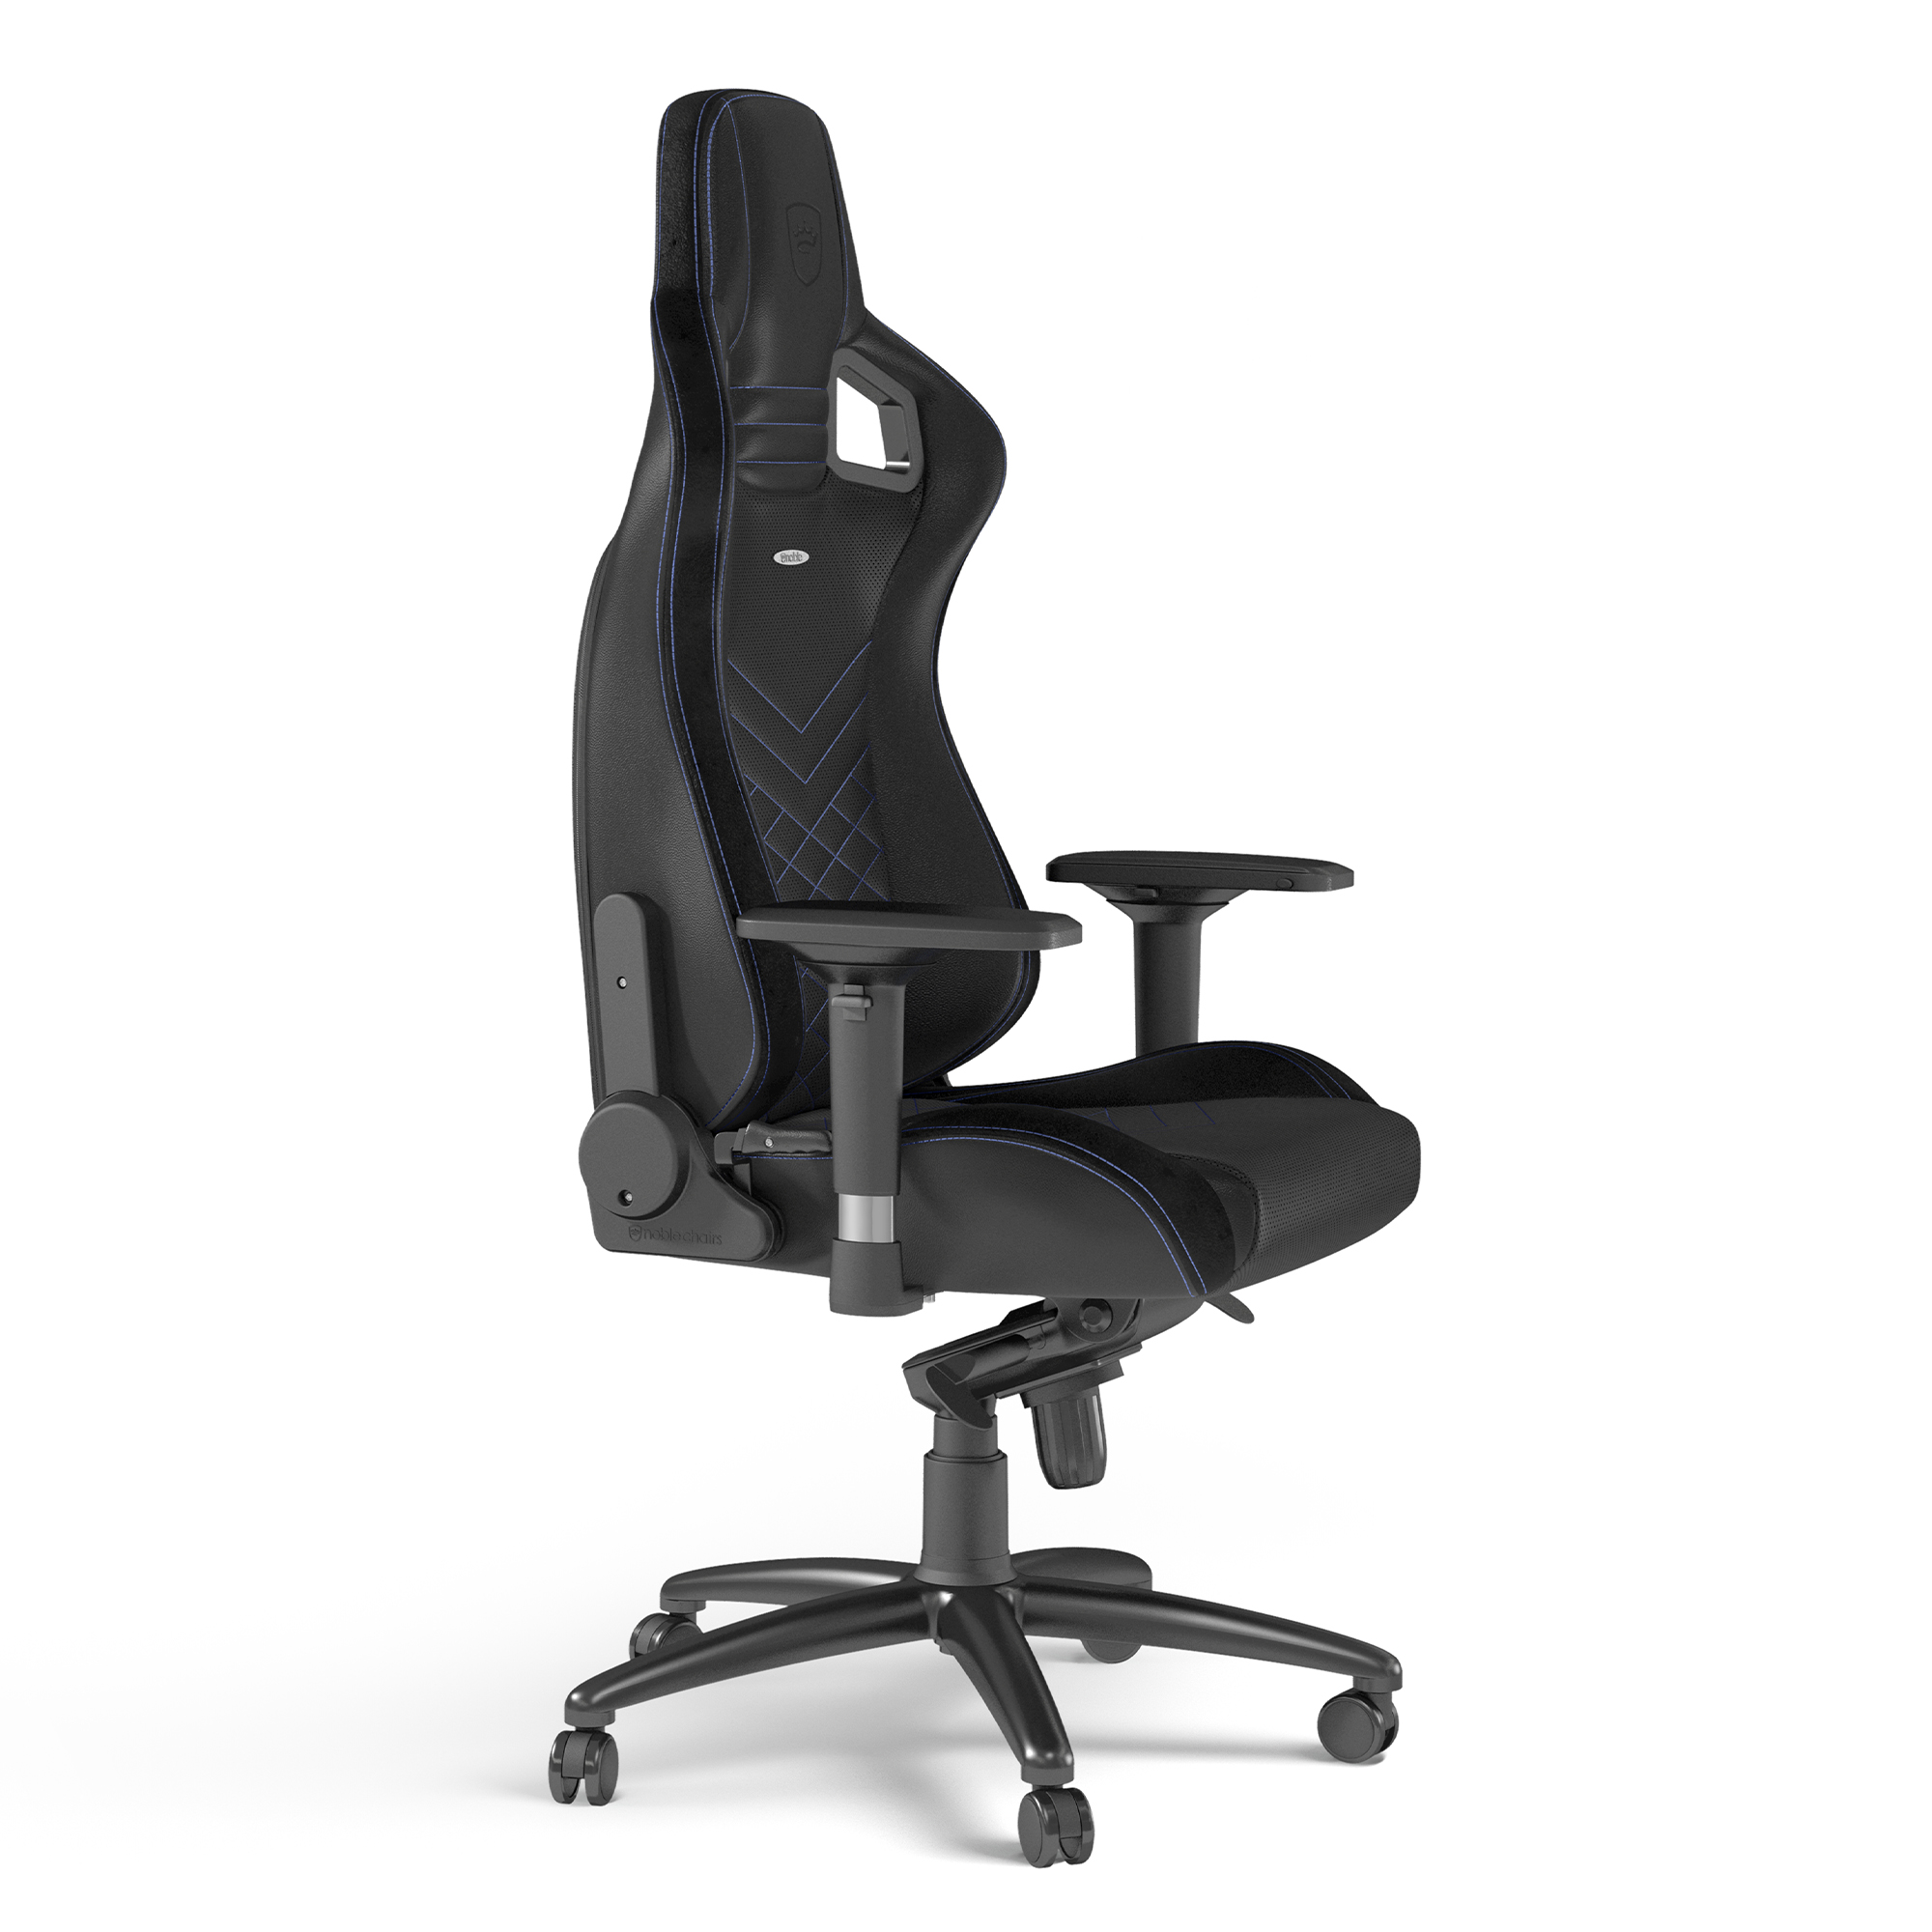 noblechairs - noblechairs EPIC Gaming Chair - Black/Blue